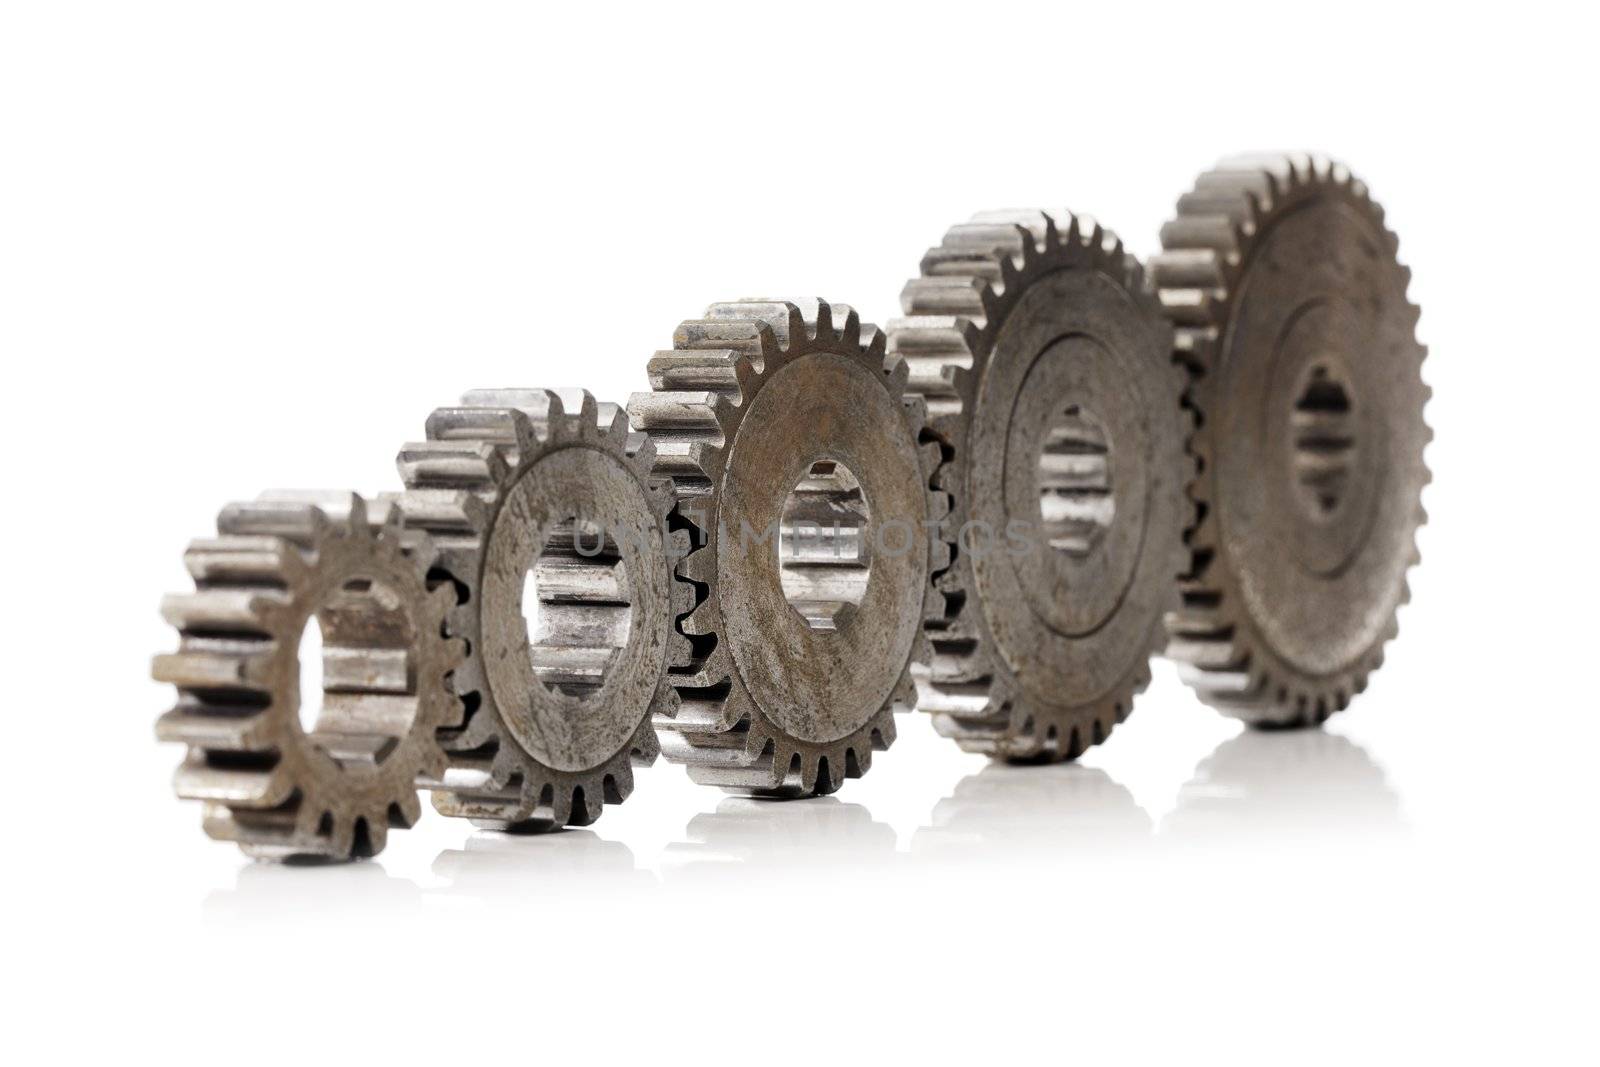 A Row of old cog gear wheels in different sizes.